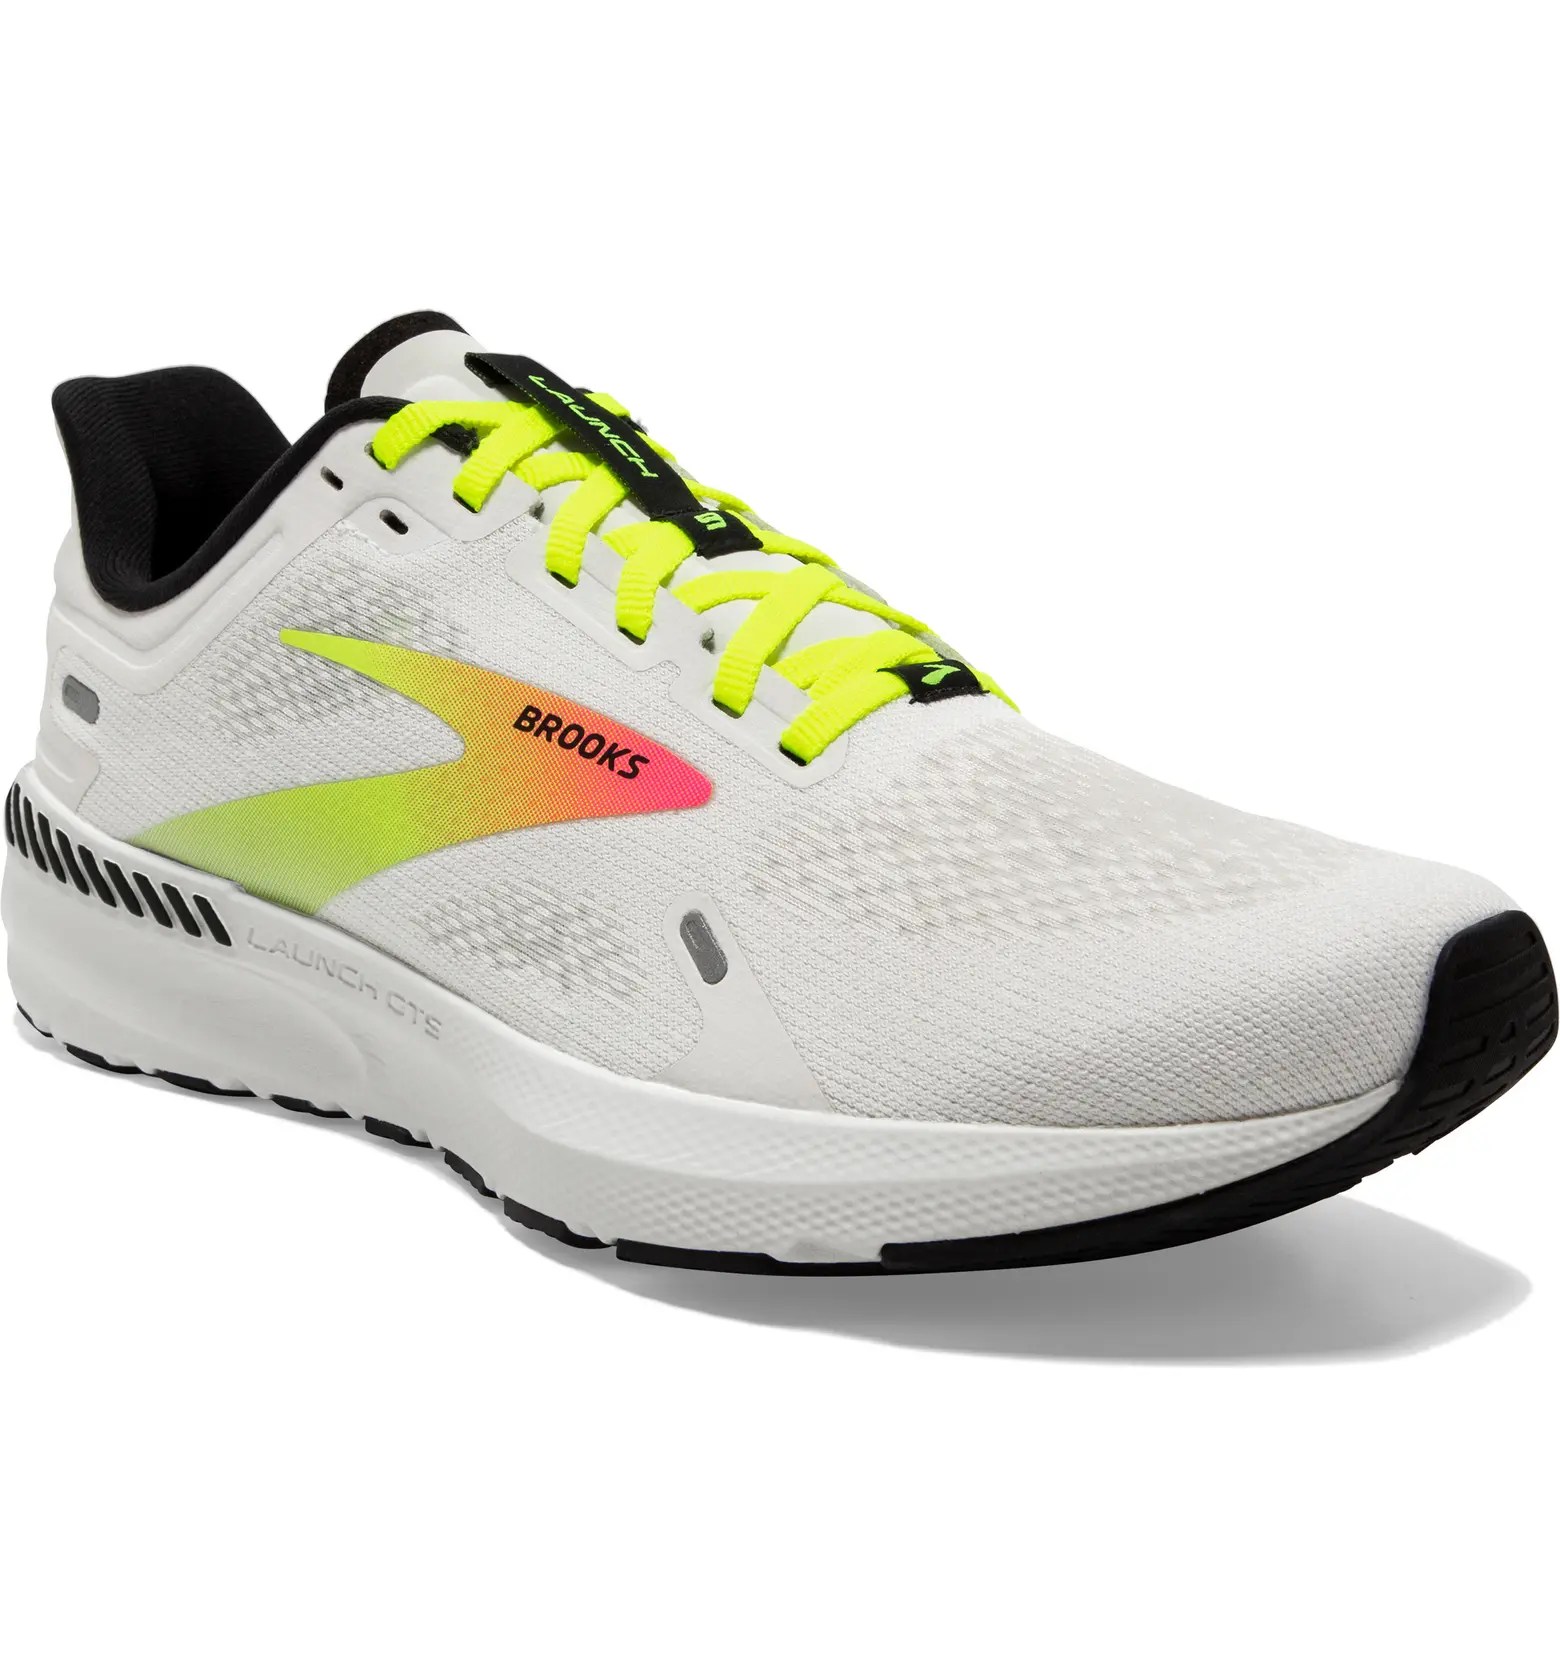 brooks launch gts 9 running shoe from the nordstrom sneaker sale on a white background